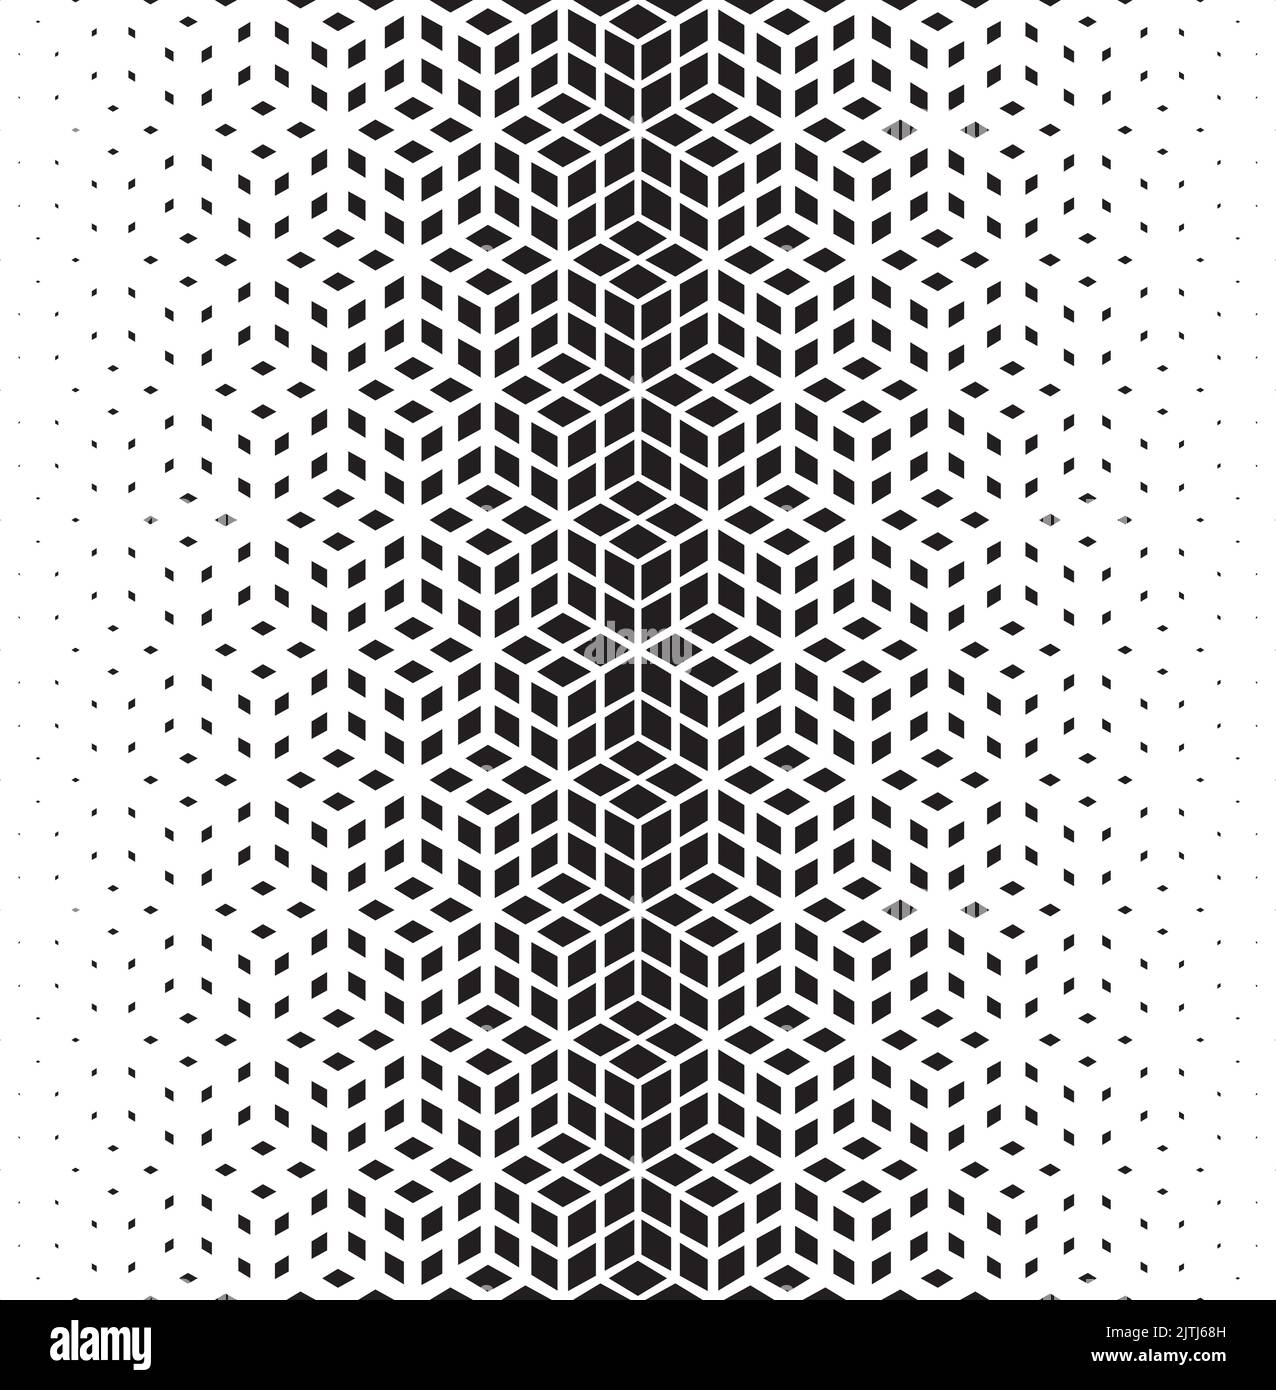 Geometric pattern of black diamonds on a white background.Seamless in one direction.Option with two-way medium attenuation Stock Vector